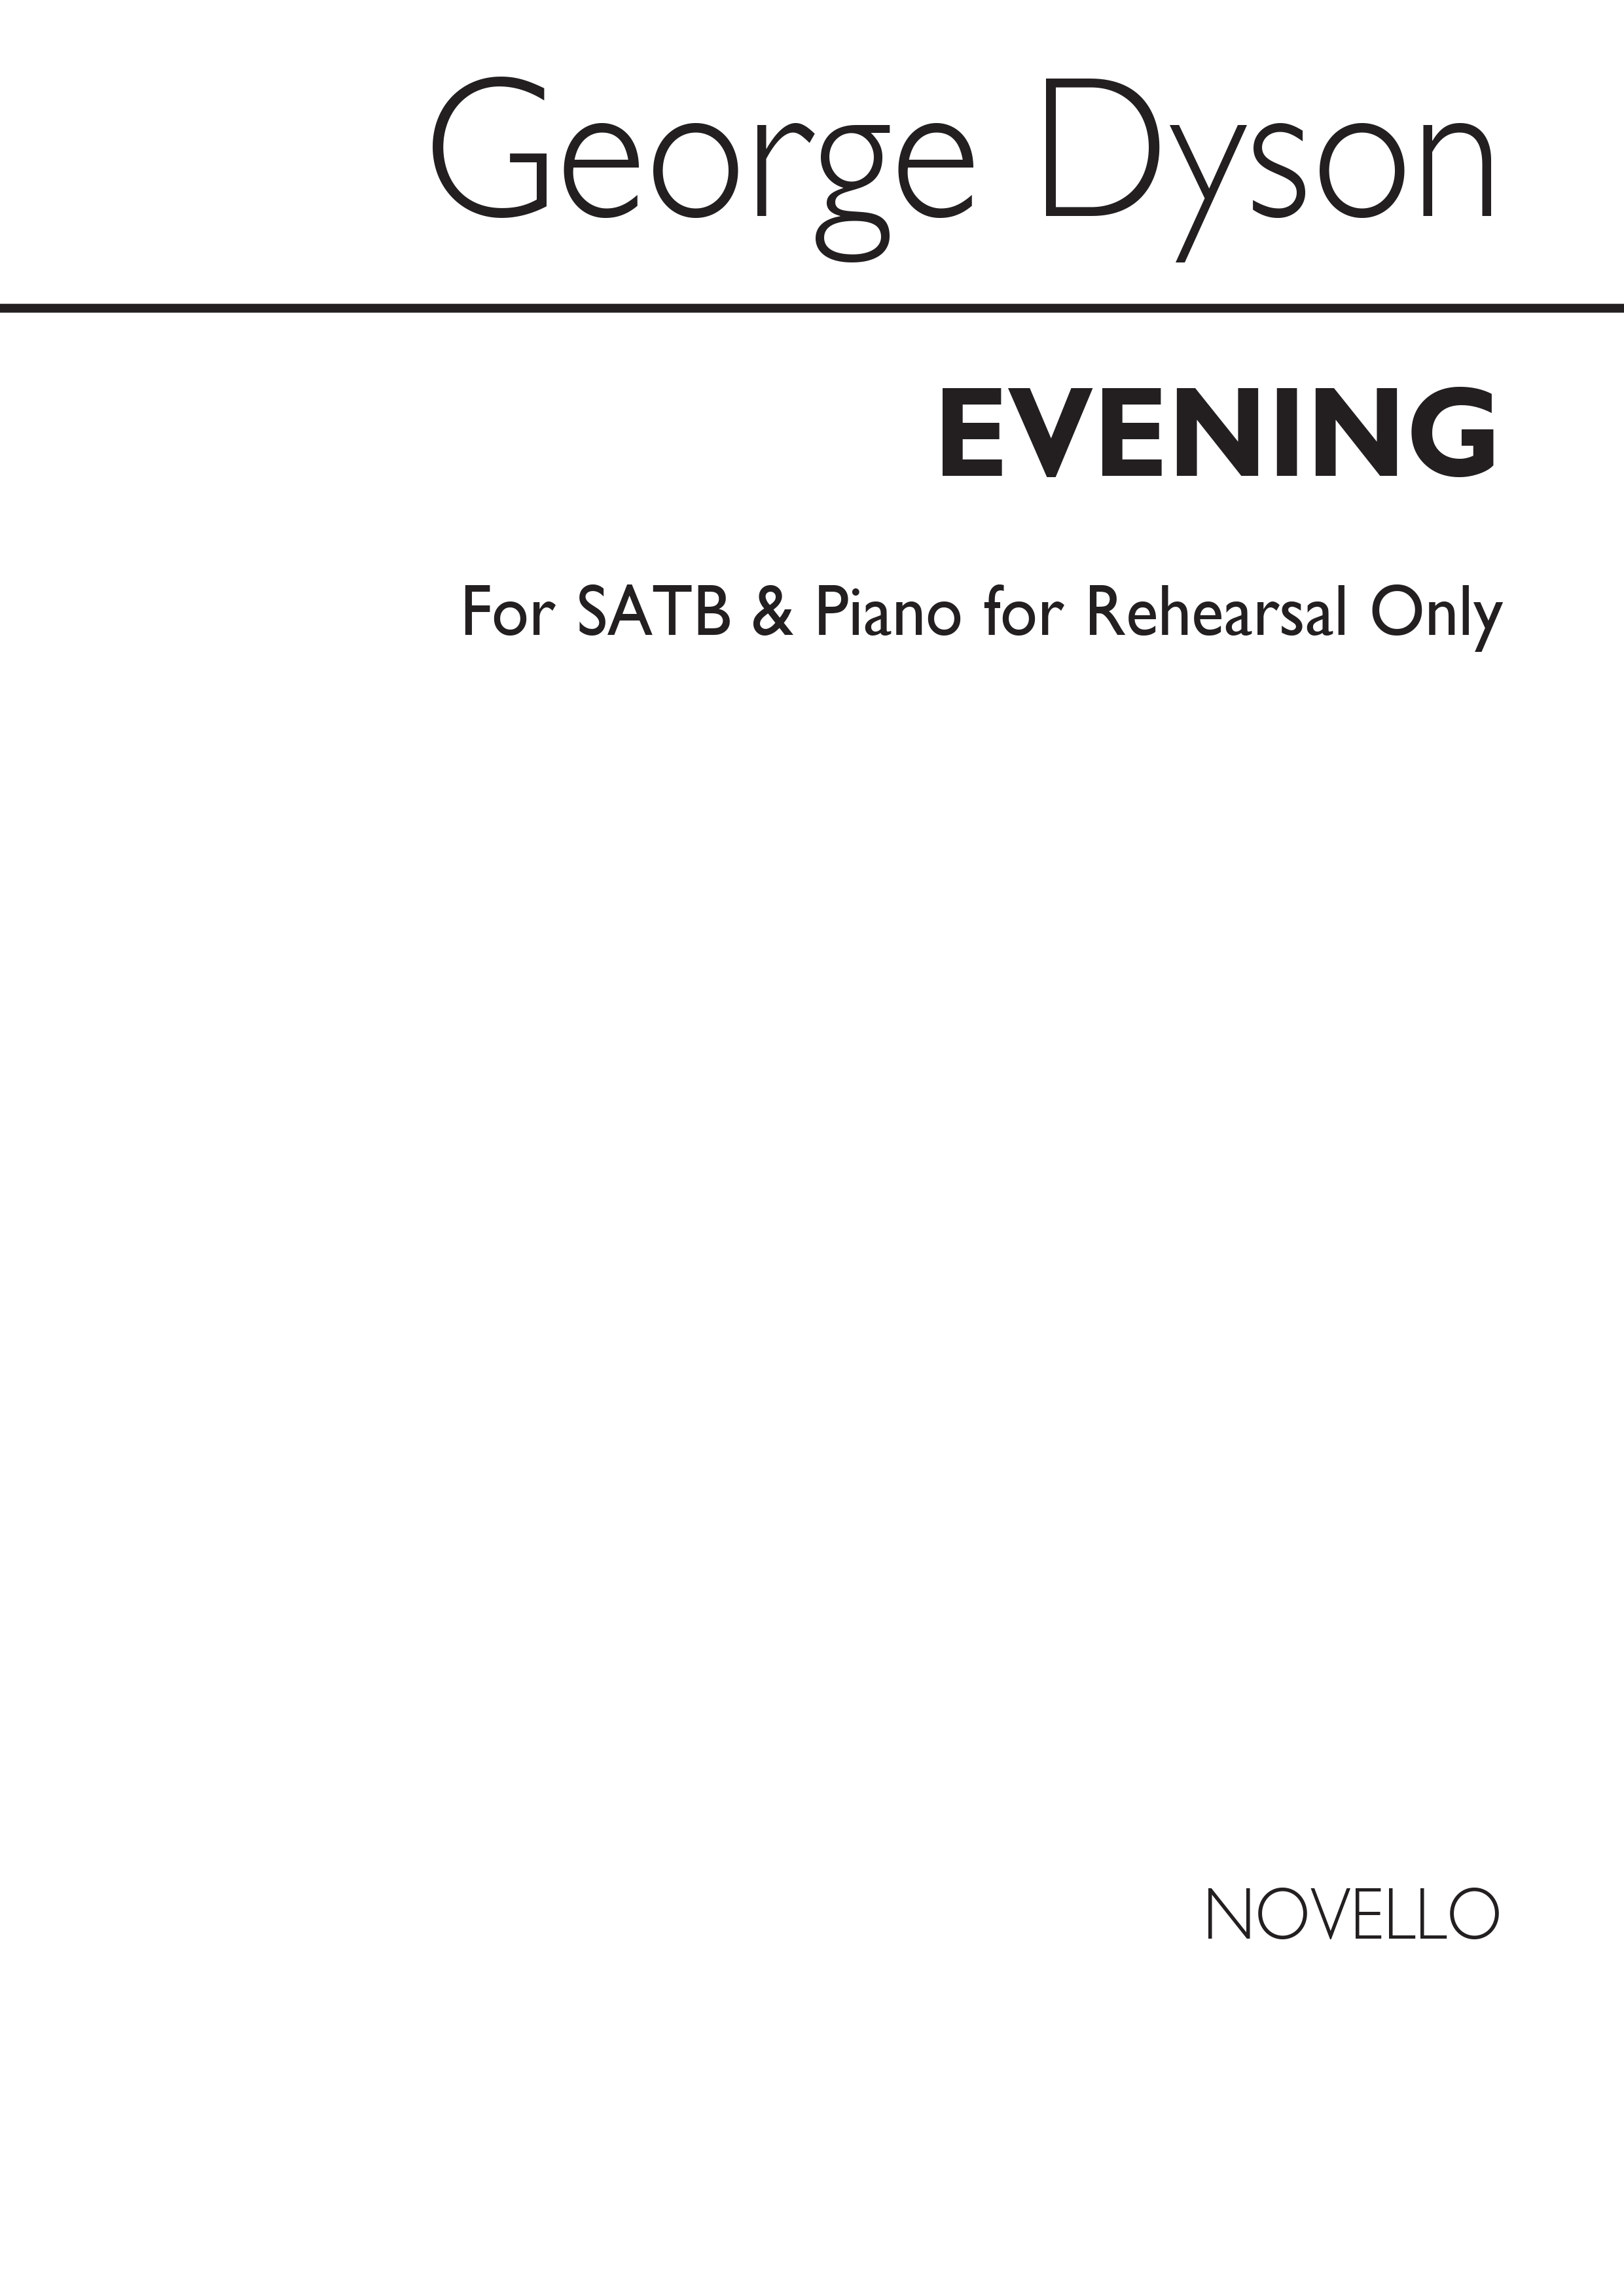 Dyson, G Evening Satb/Piano (For Rehearsal Only)